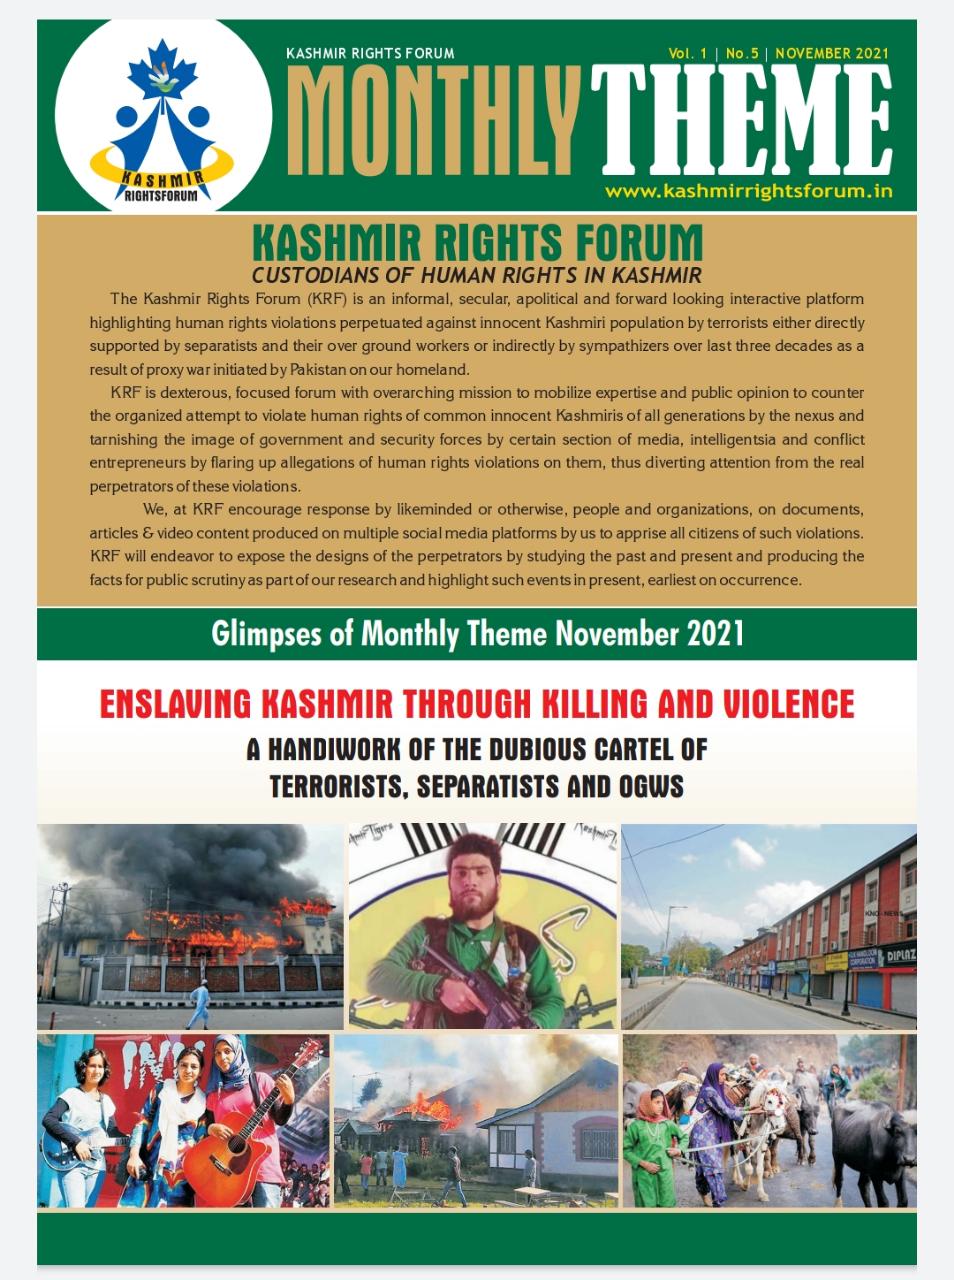 A preview of Monthly Theme November 2021 carrying detailed report on enslaving Kashmiri youth by Pakistan and the terror agencies.